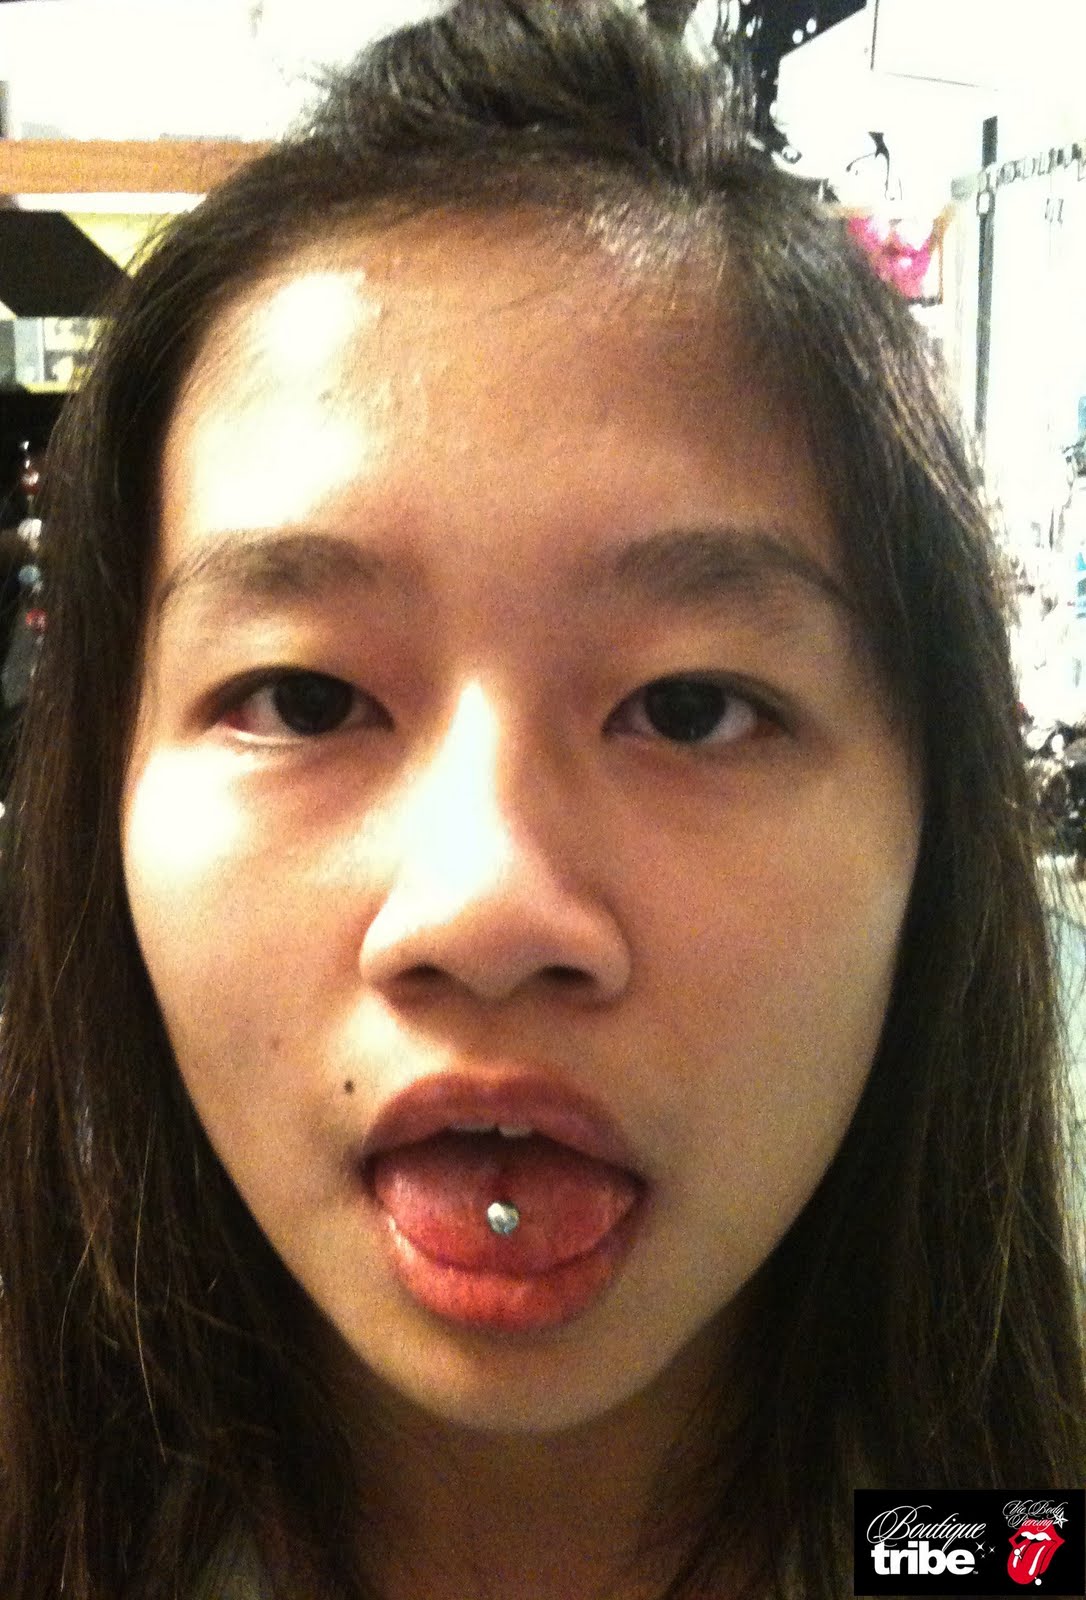 Vie Body Piercing @ Boutique Tribe: Tongue piercing